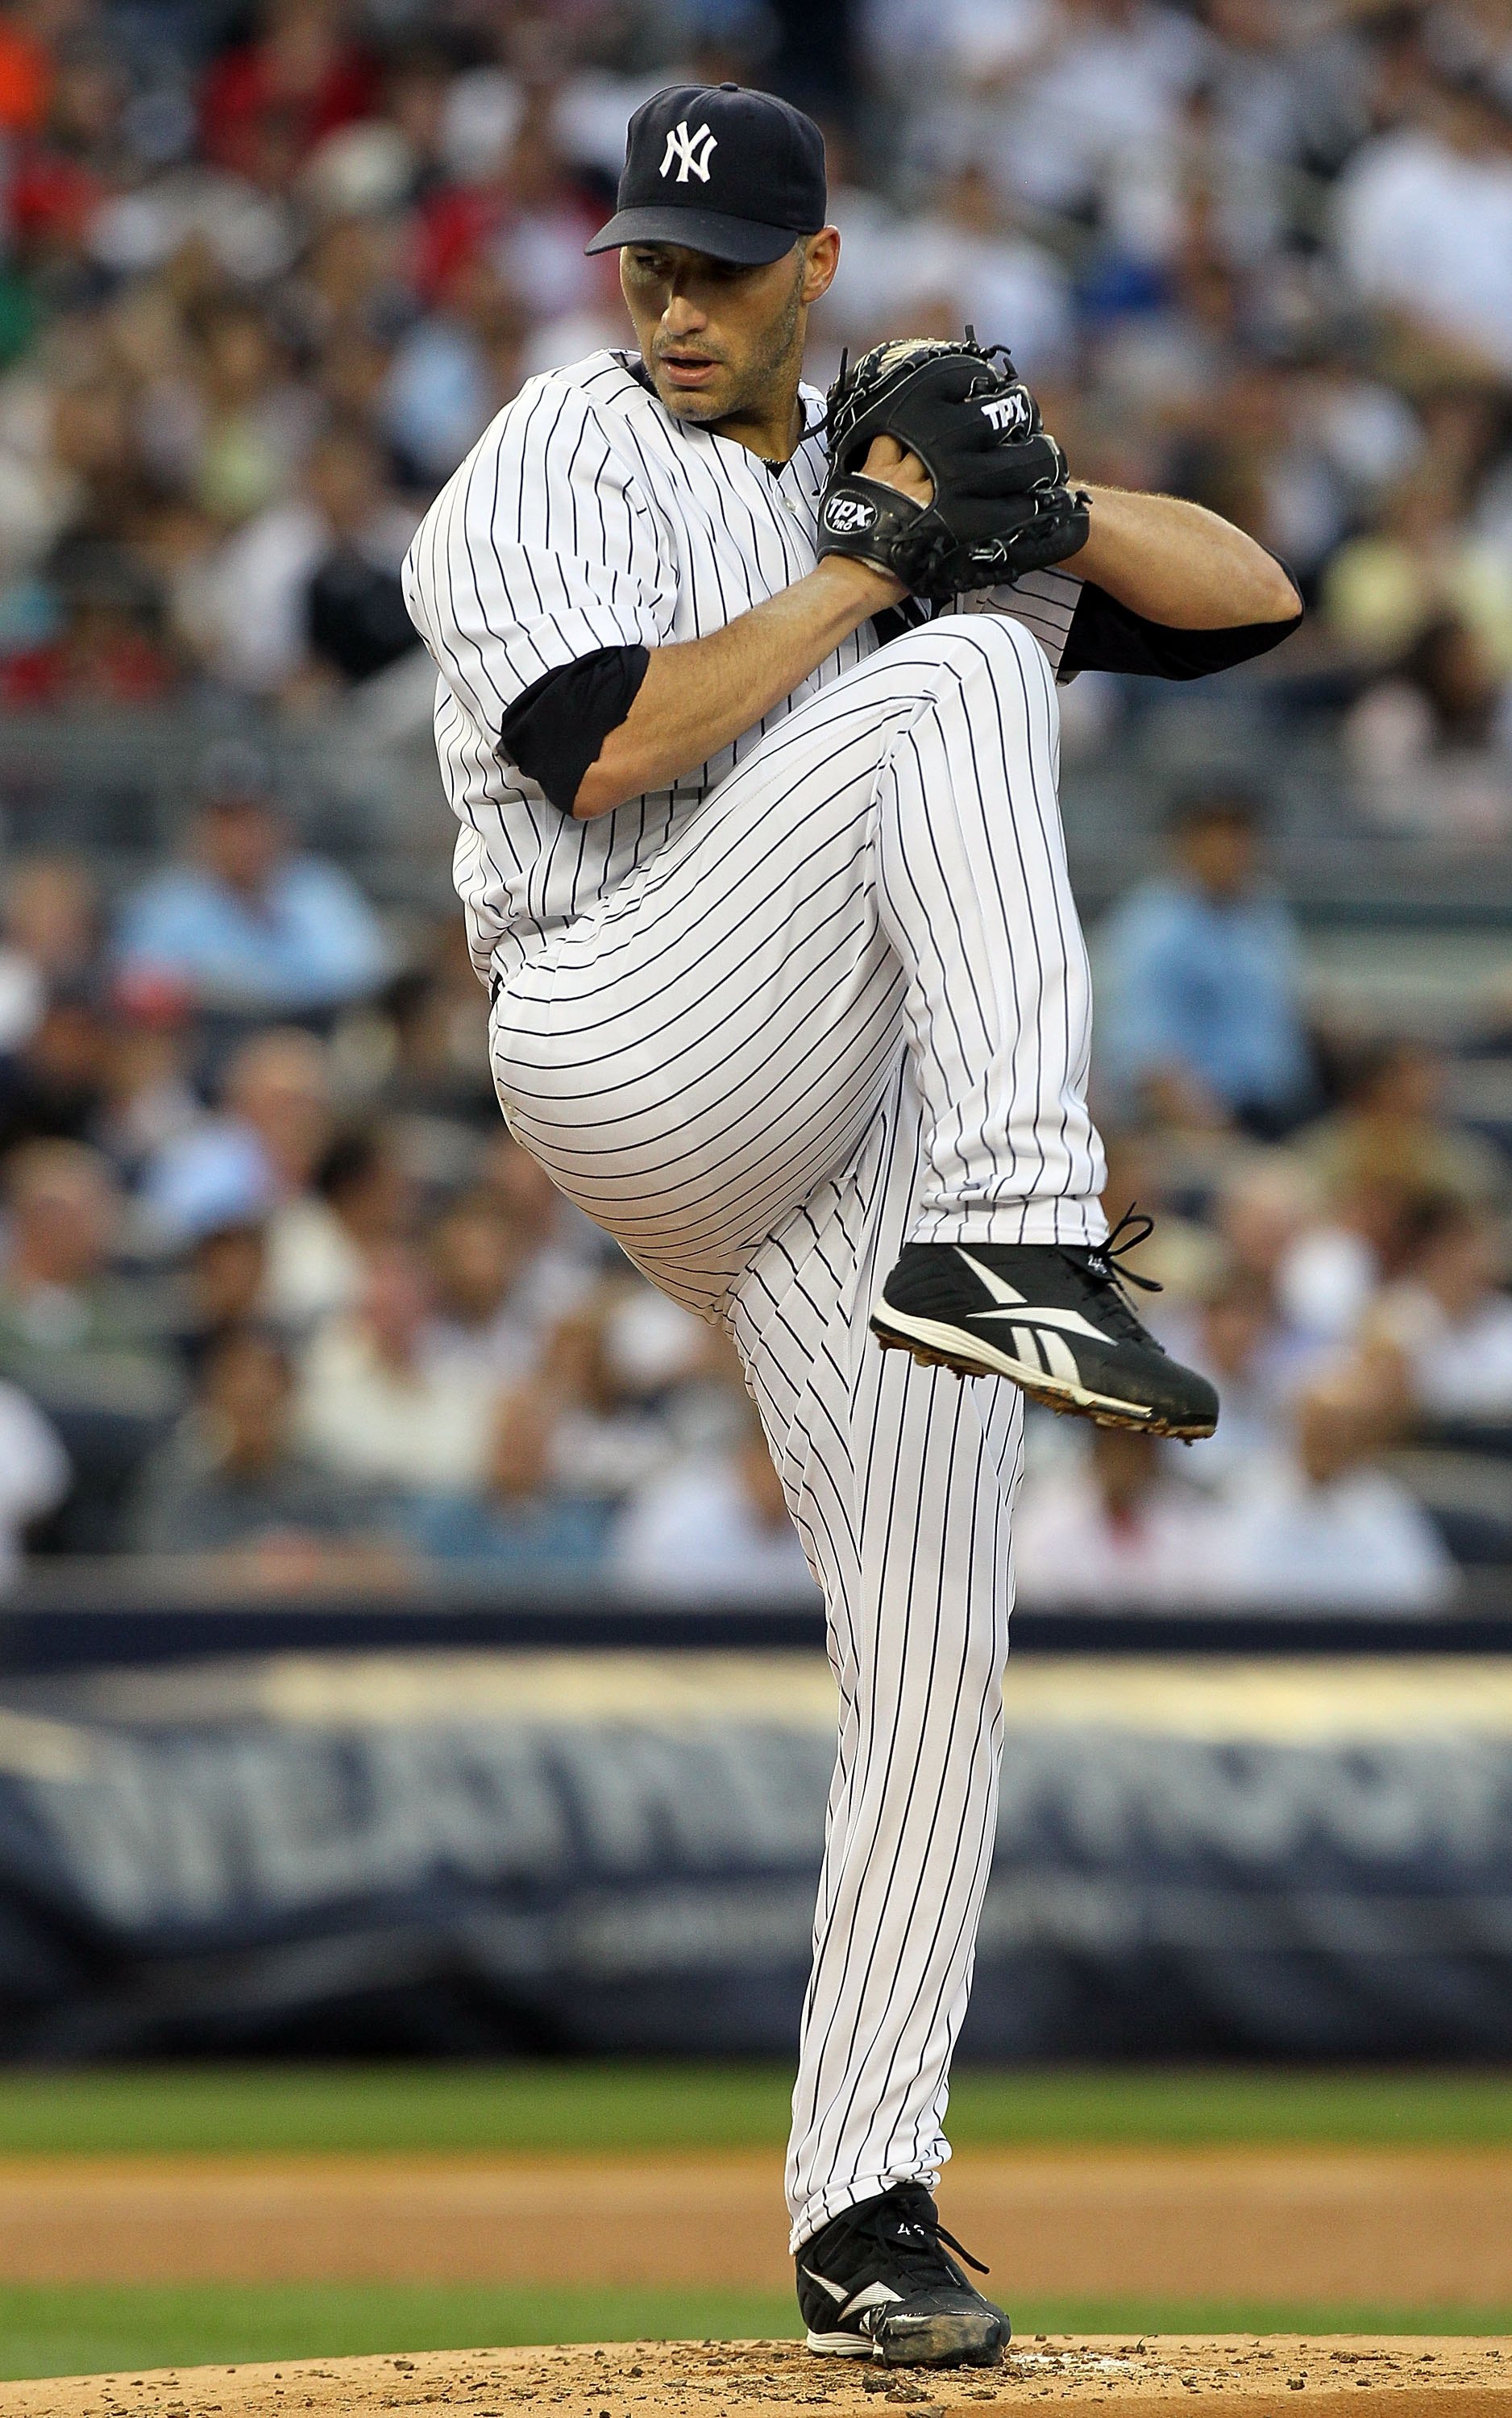 Andy Pettitte is pulling for Houston, but rooting for the Yankees